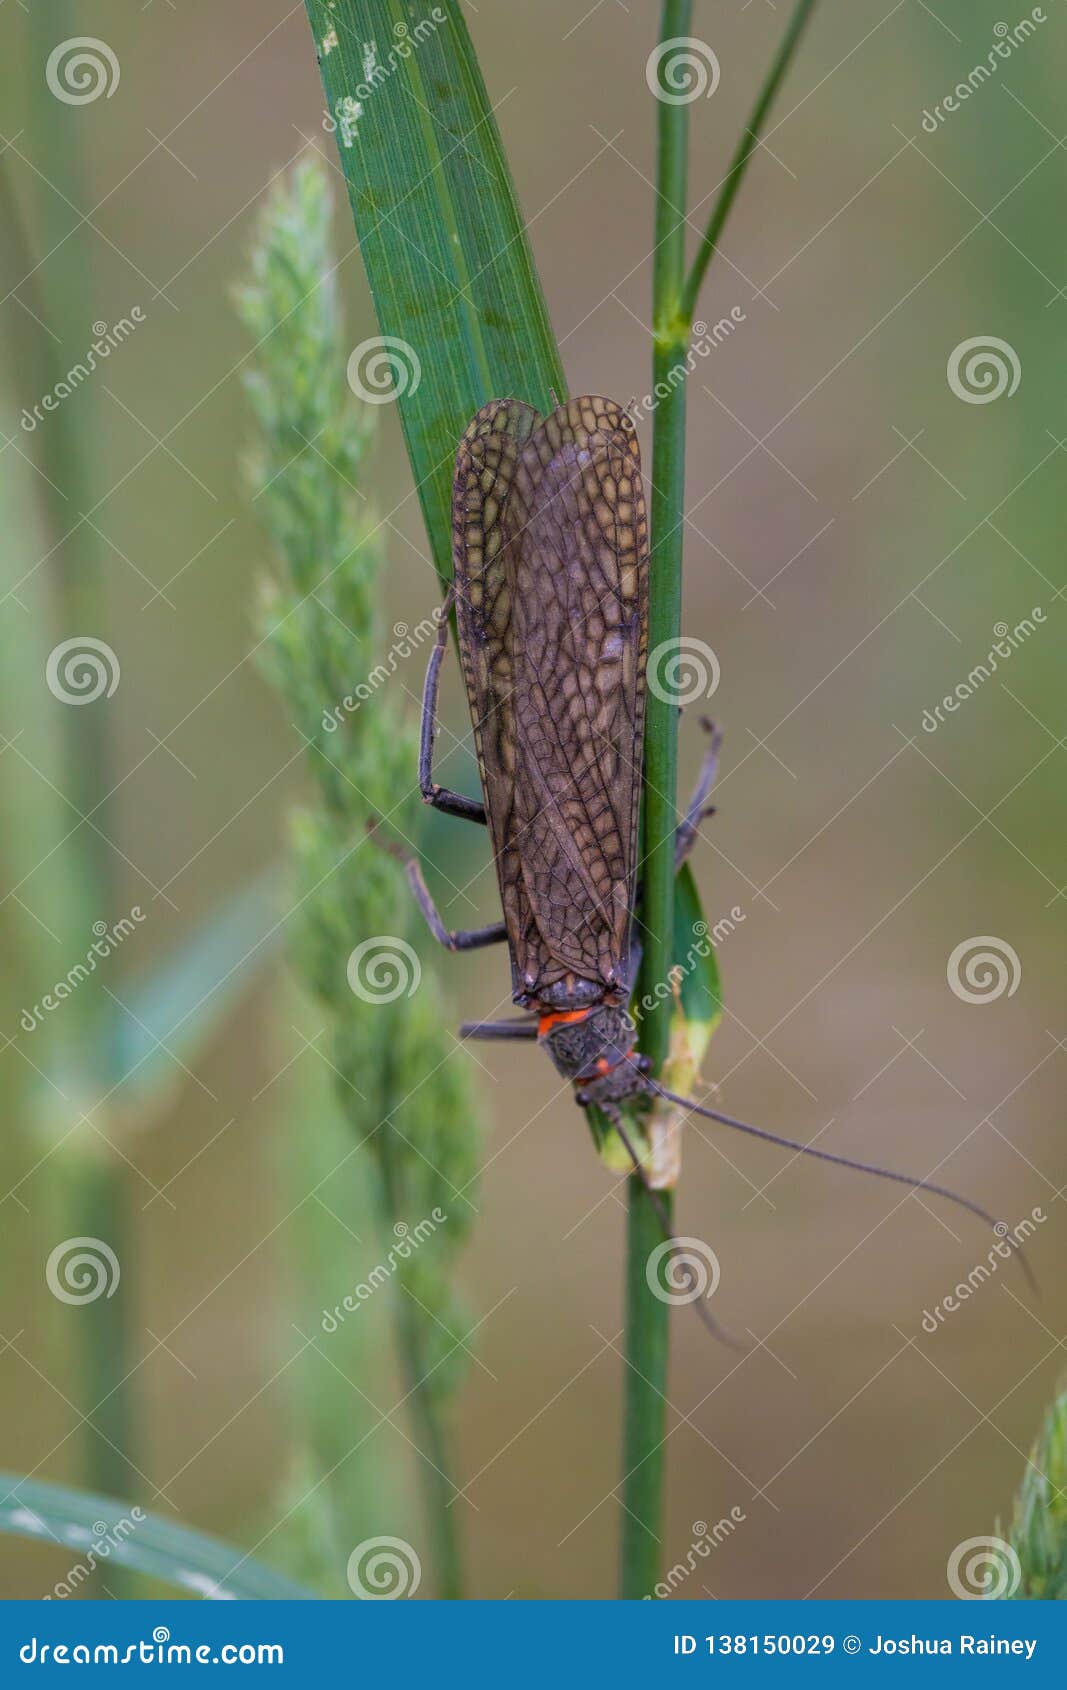 https://thumbs.dreamstime.com/z/lower-deschutes-river-oregon-fly-fishing-trip-may-salmonfly-bug-waiting-leaves-grass-along-banks-138150029.jpg